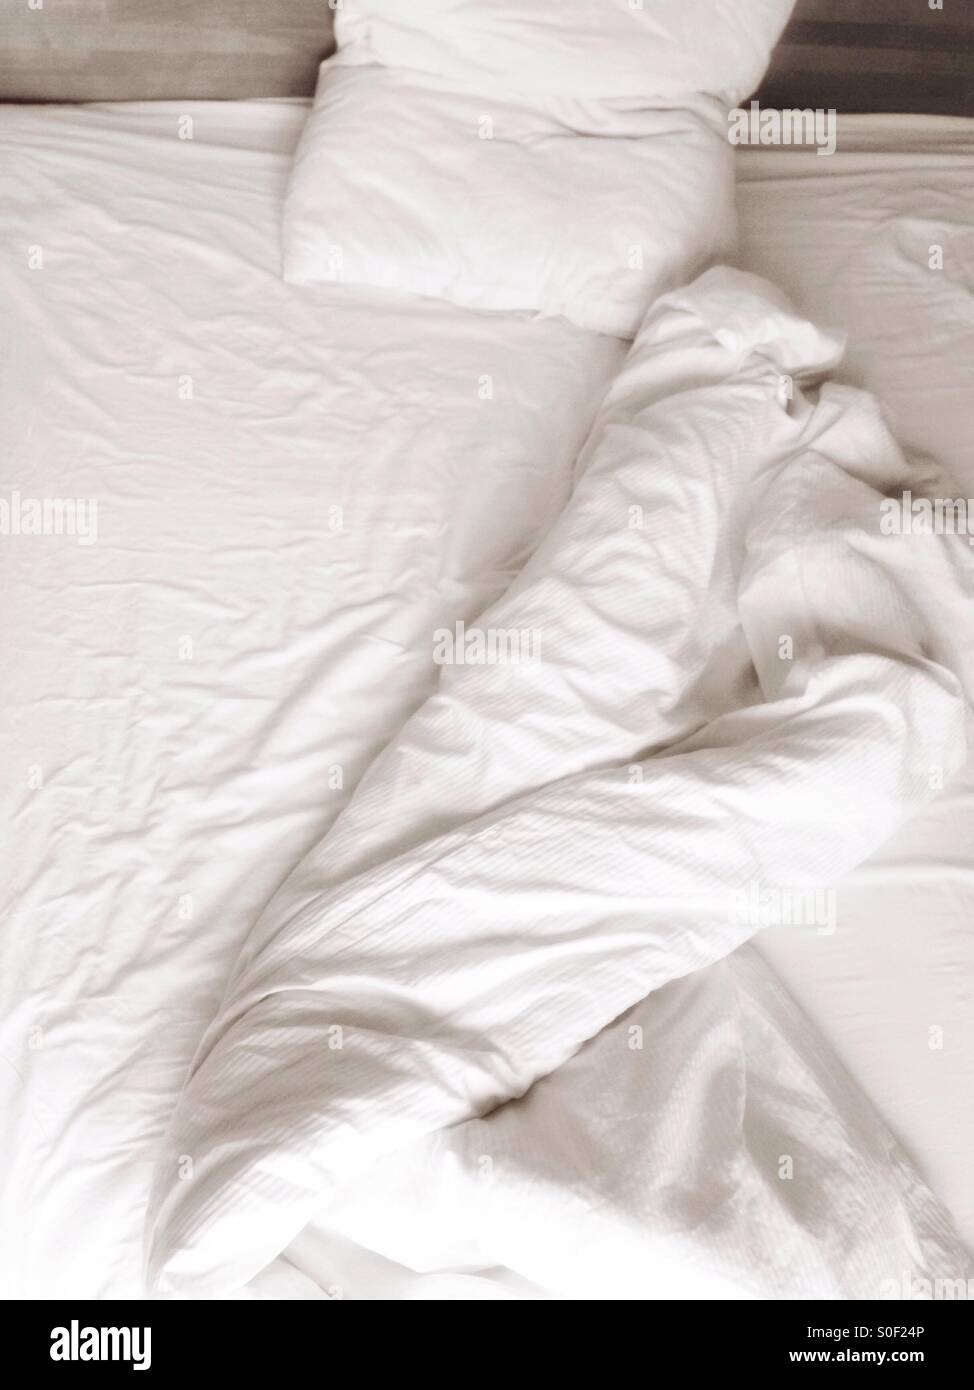 An unmade bed with white linen Stock Photo